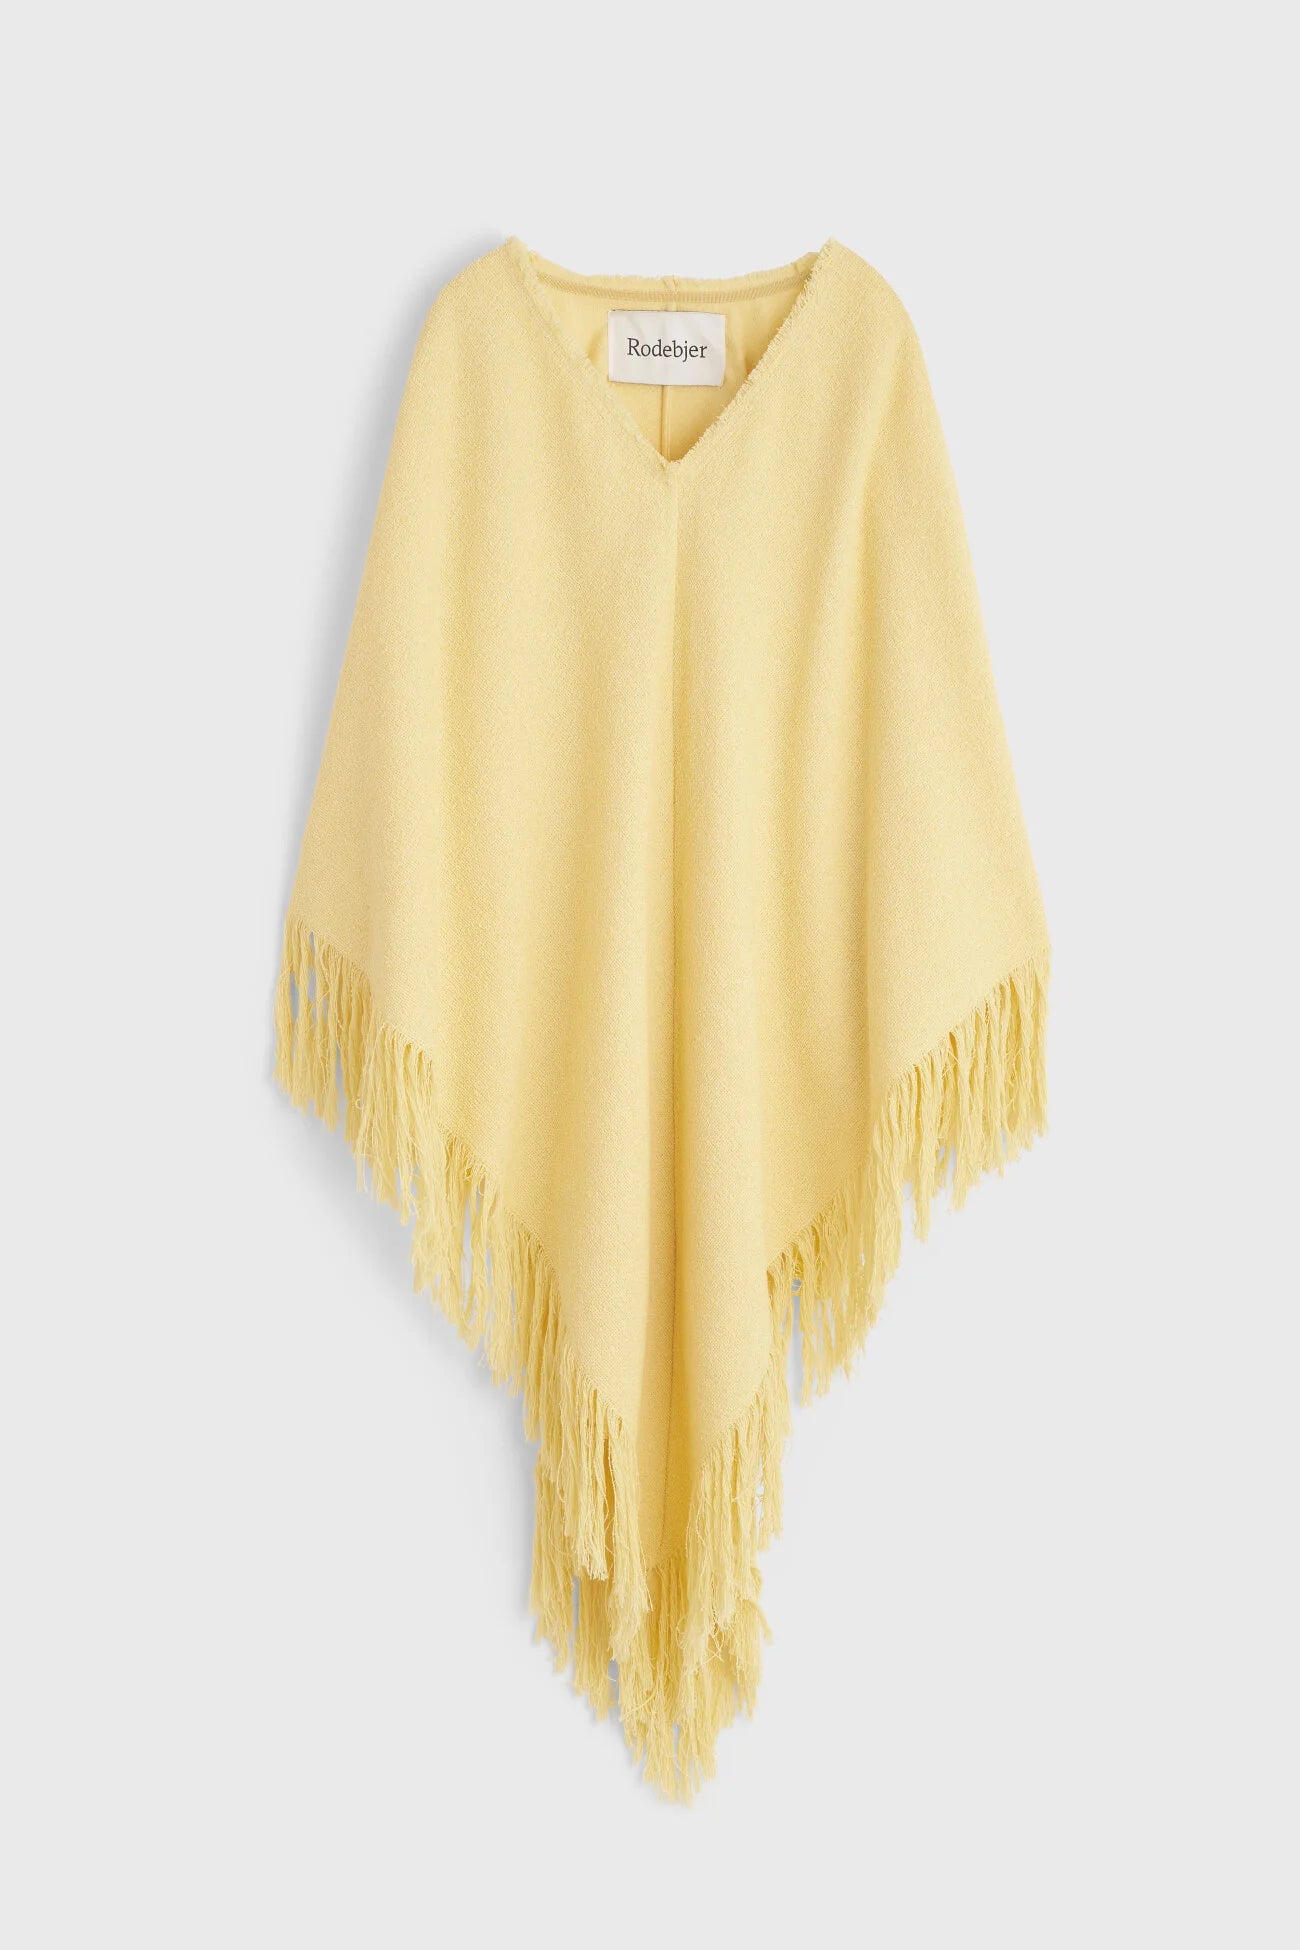 Rodebjer Clove poncho